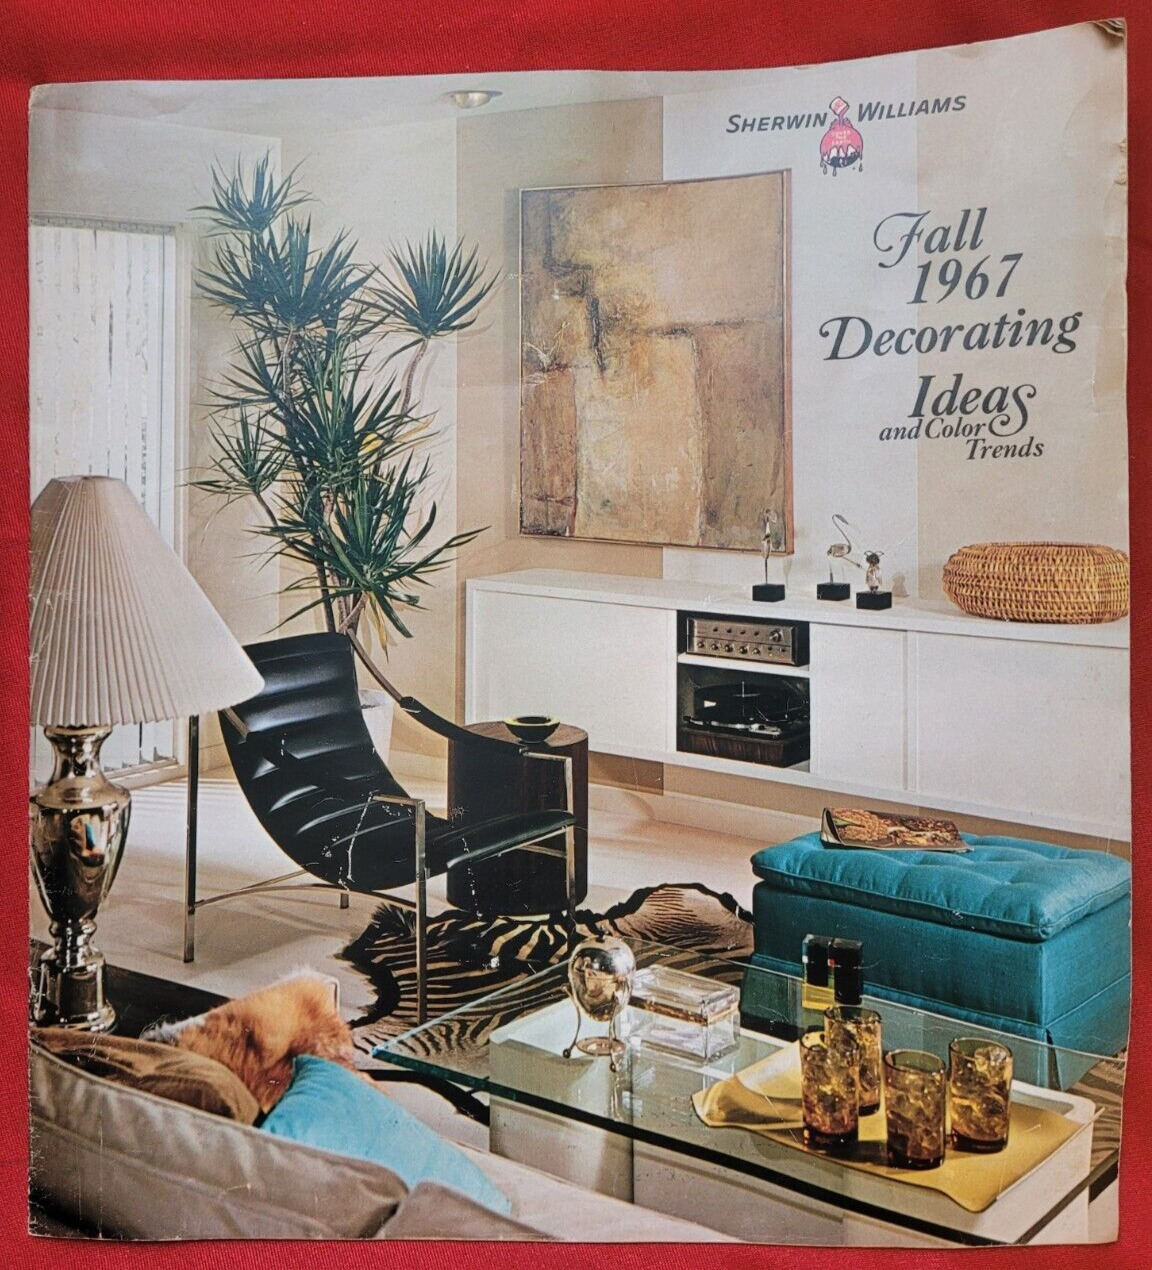 SHERWIN WILLIAMS FALL 1967 DECORATING IDEAS & COLOR TRENDS Interior Examples